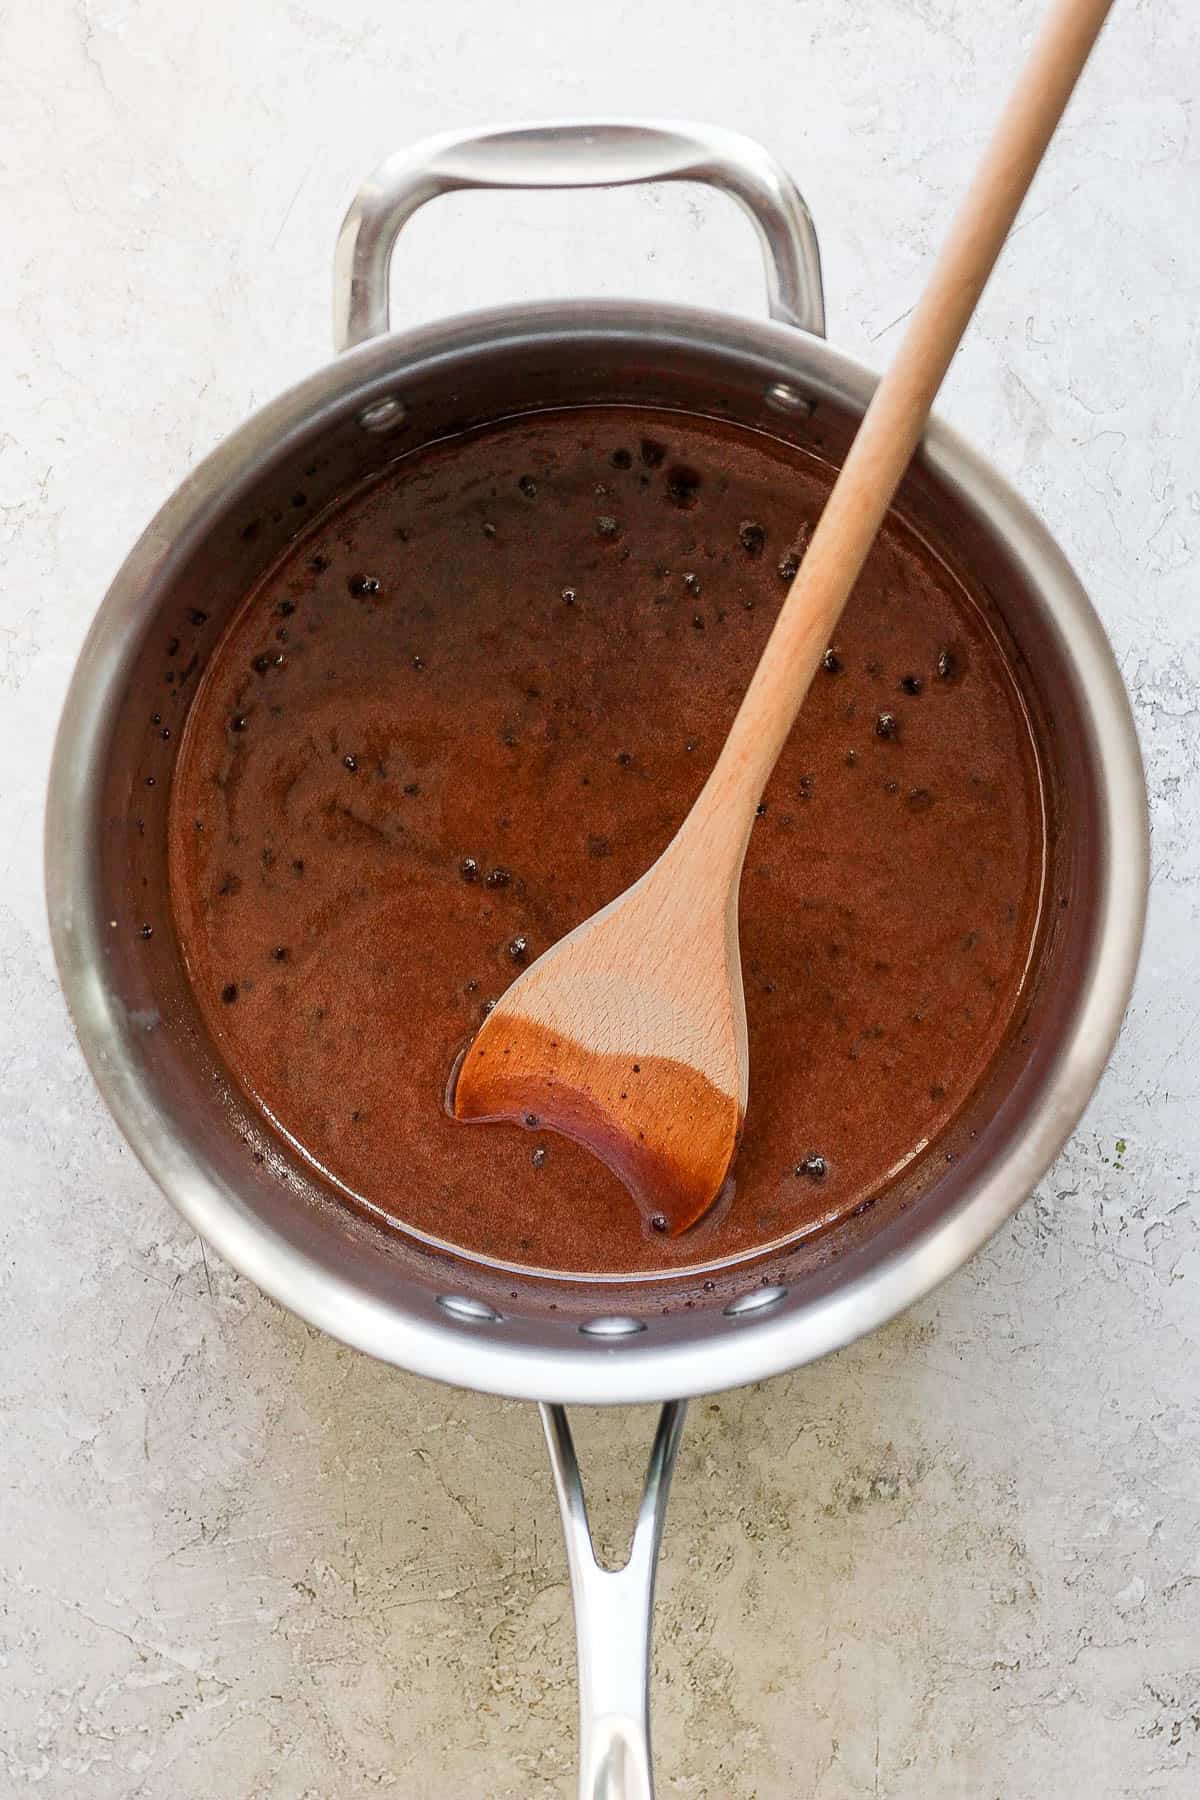 Milk, butter, and cocoa powder melted together in a sauce pan.